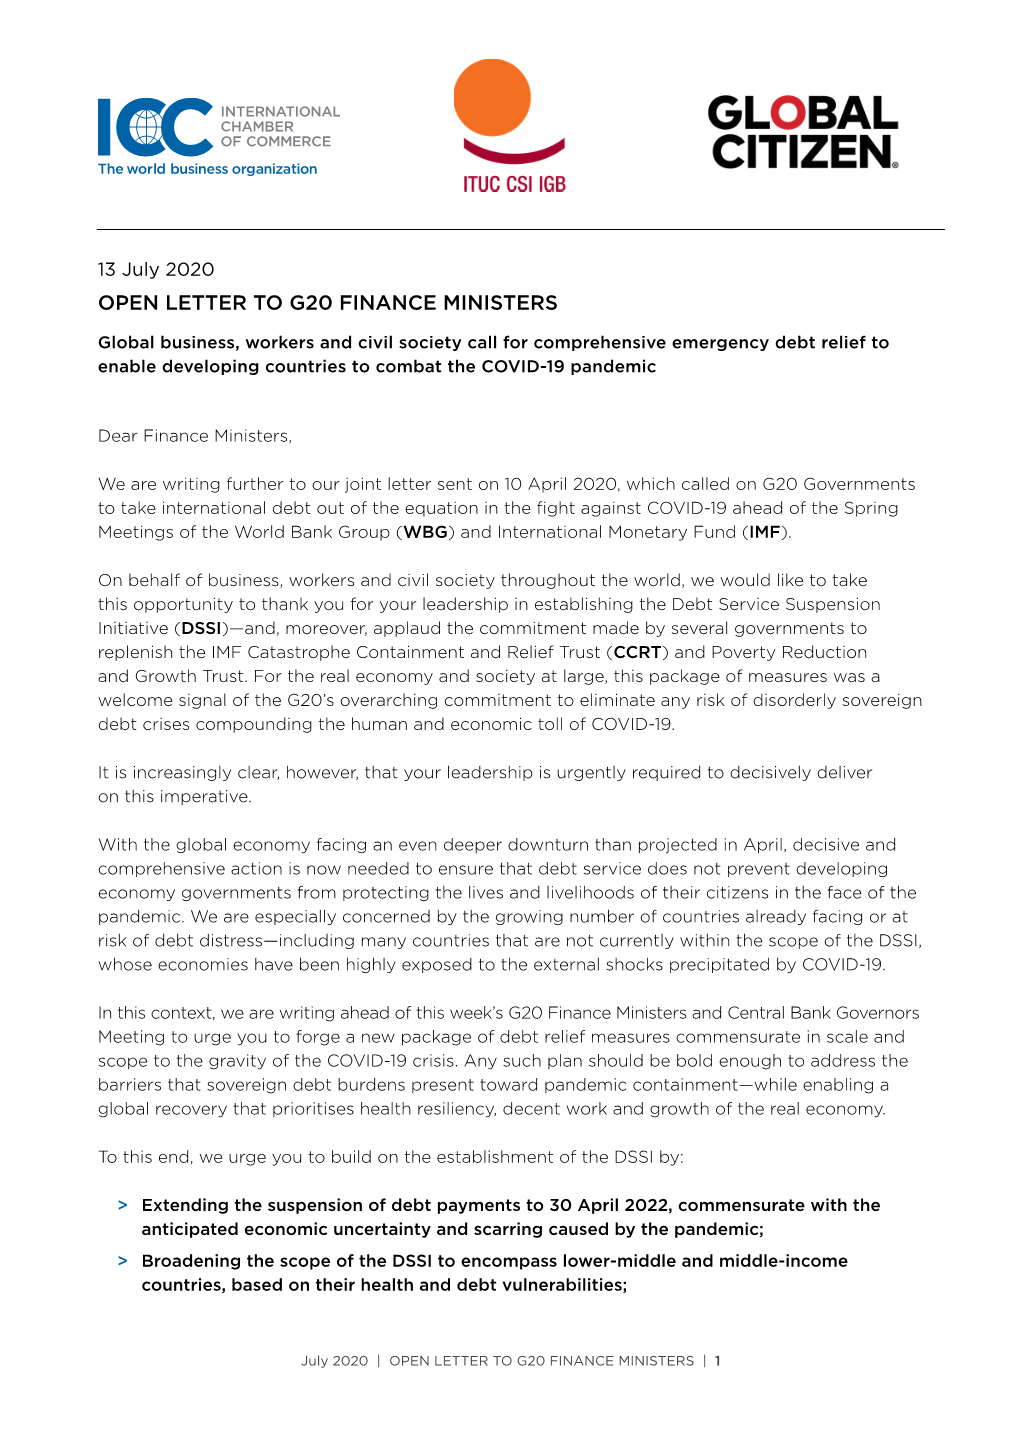 Open Letter to G20 Finance Ministers